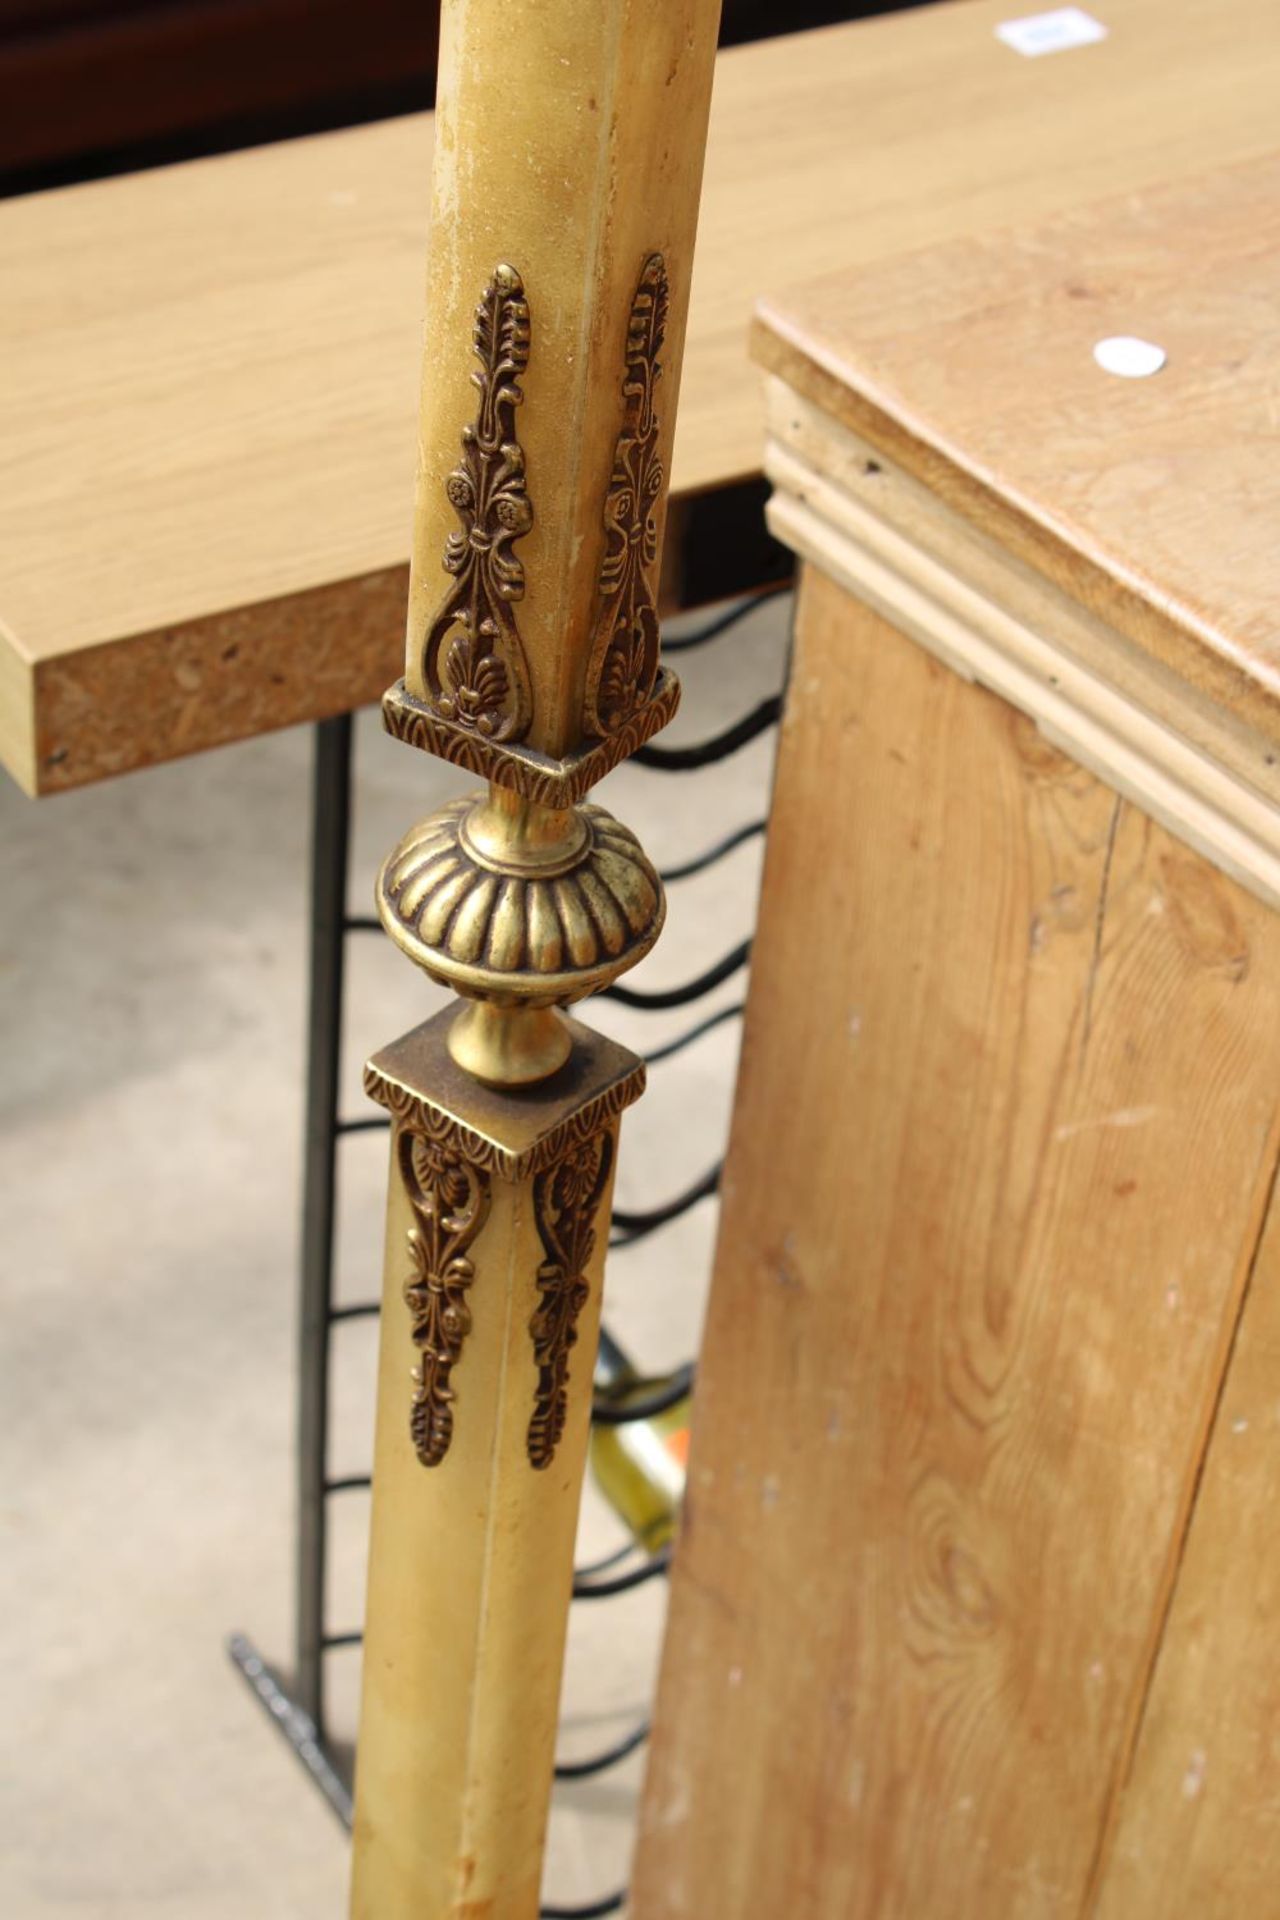 A MODERN ONYX AND BRASS STANDARD LAMP AND PEDESTAL BASE - Image 3 of 4